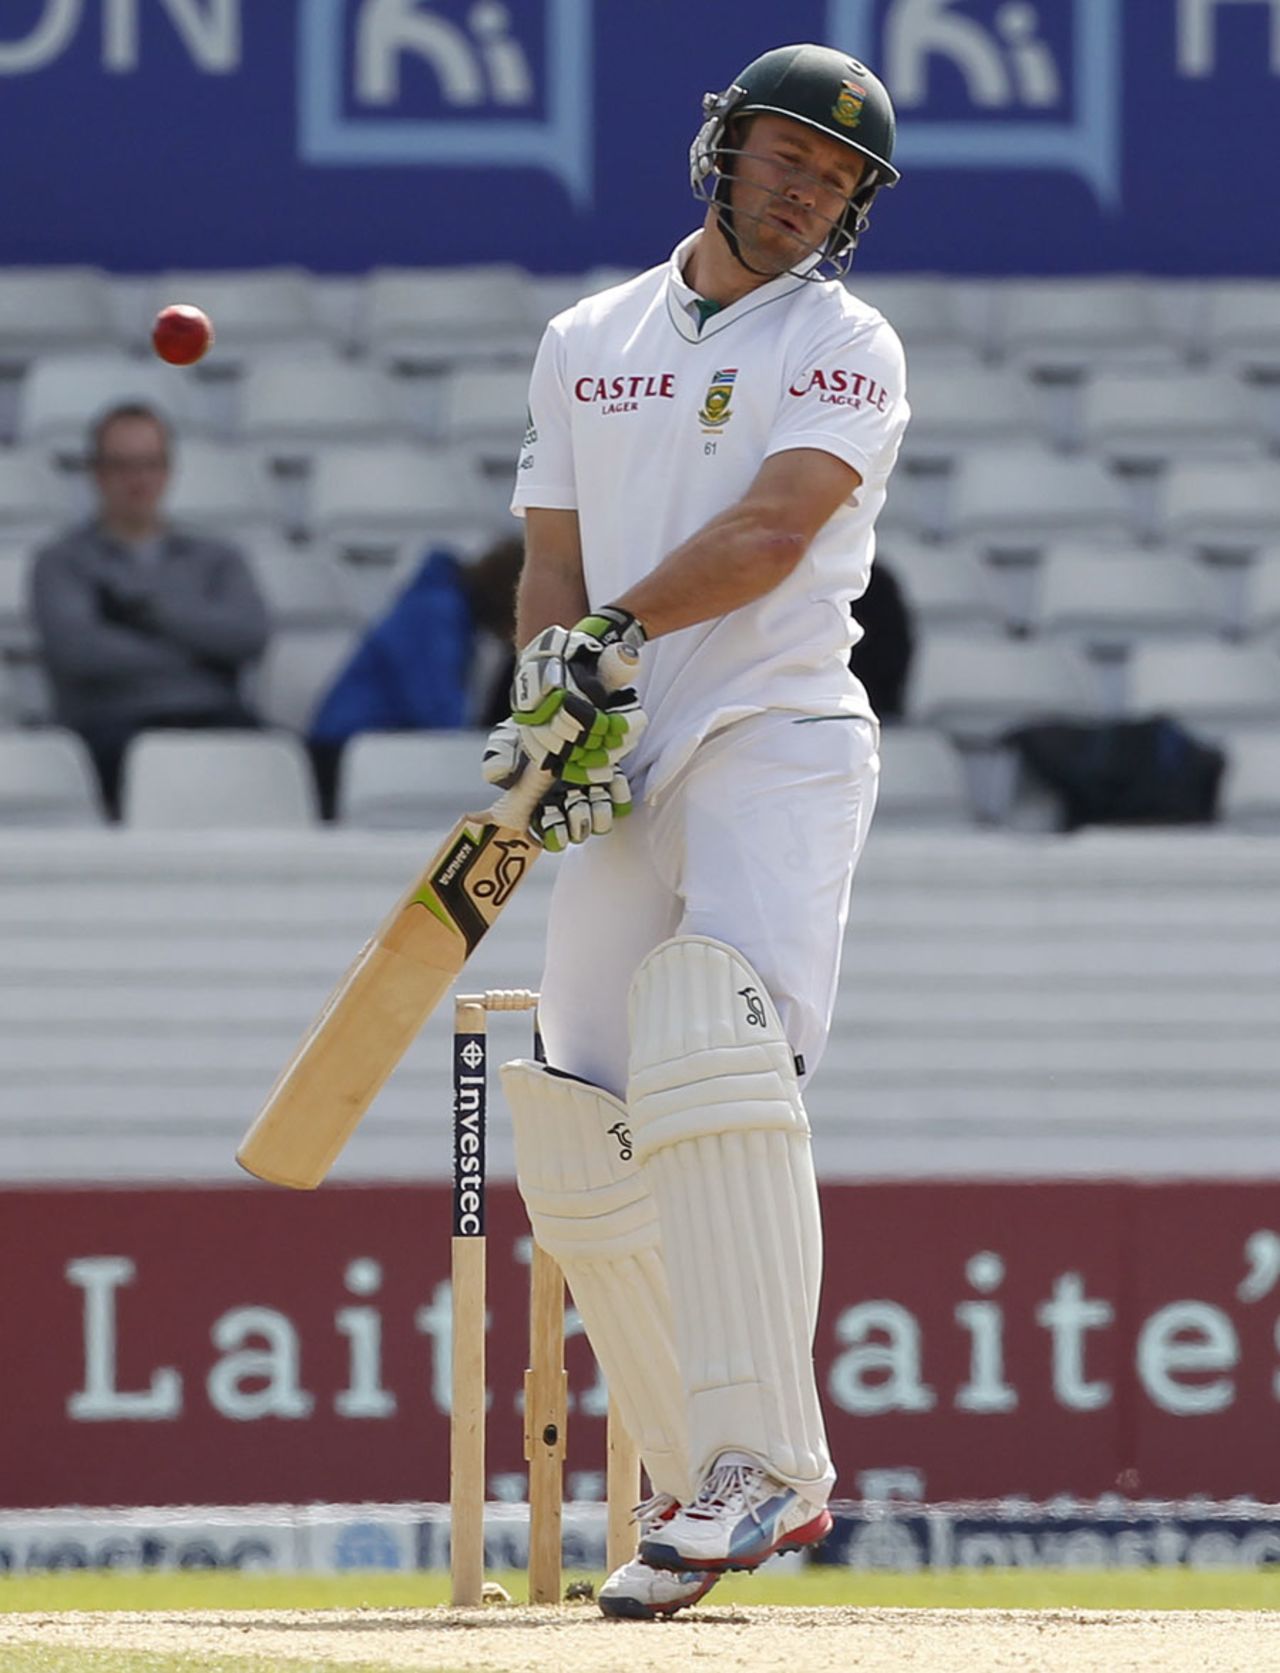 AB de Villiers made a brisk 44, England v South Africa, 2nd Investec Test, Headingley, 5th day, August 6, 2012